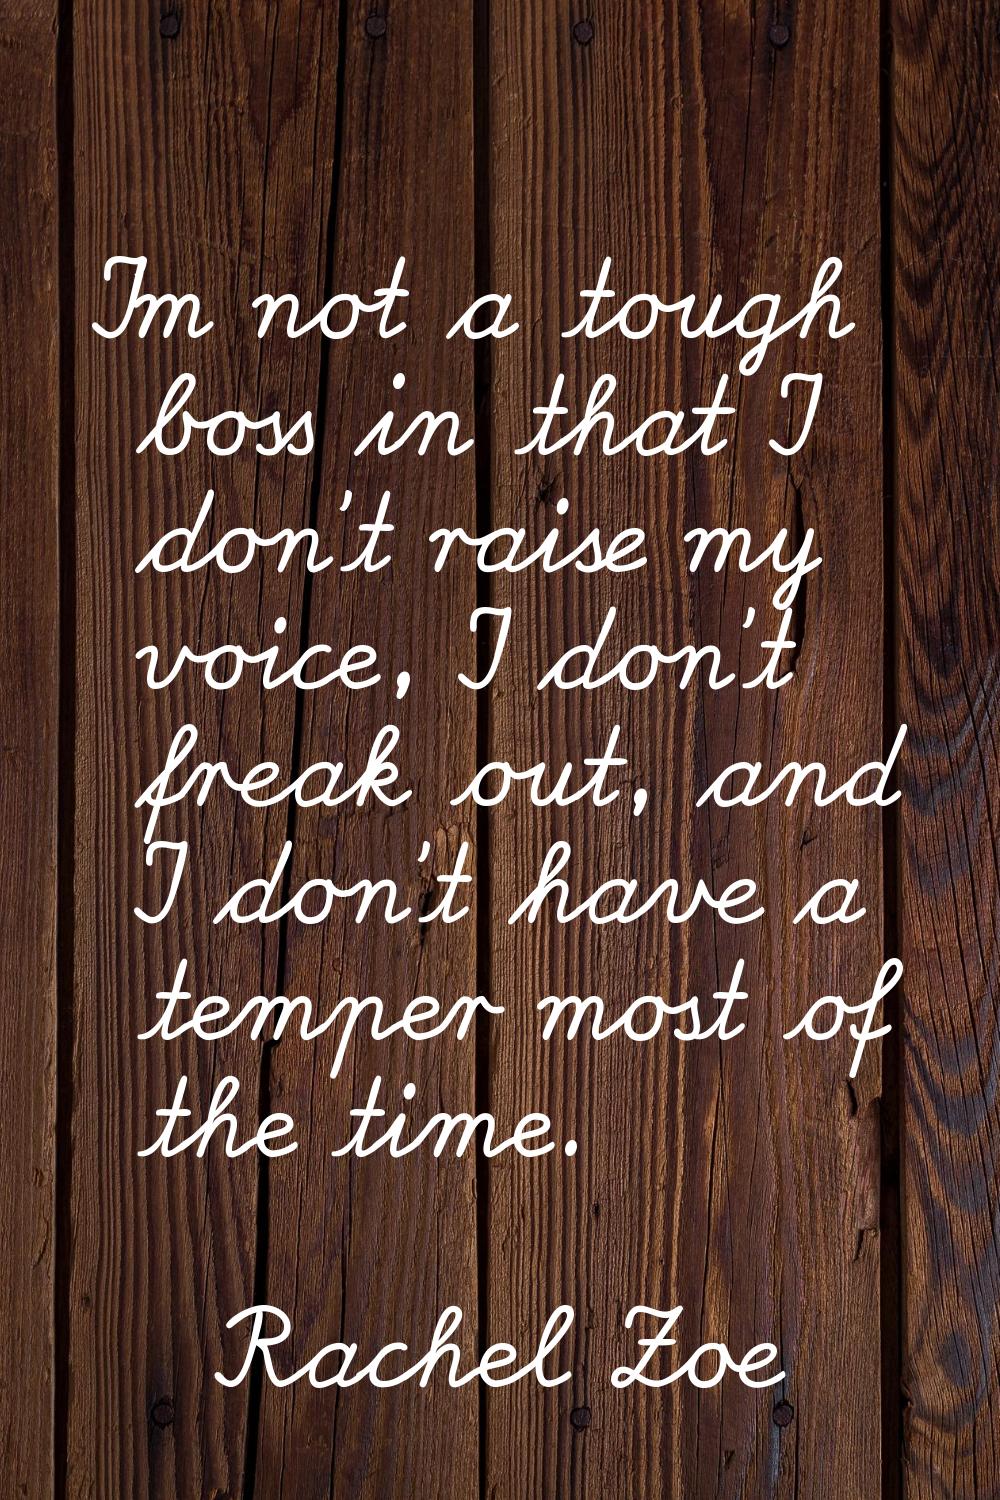 I'm not a tough boss in that I don't raise my voice, I don't freak out, and I don't have a temper m